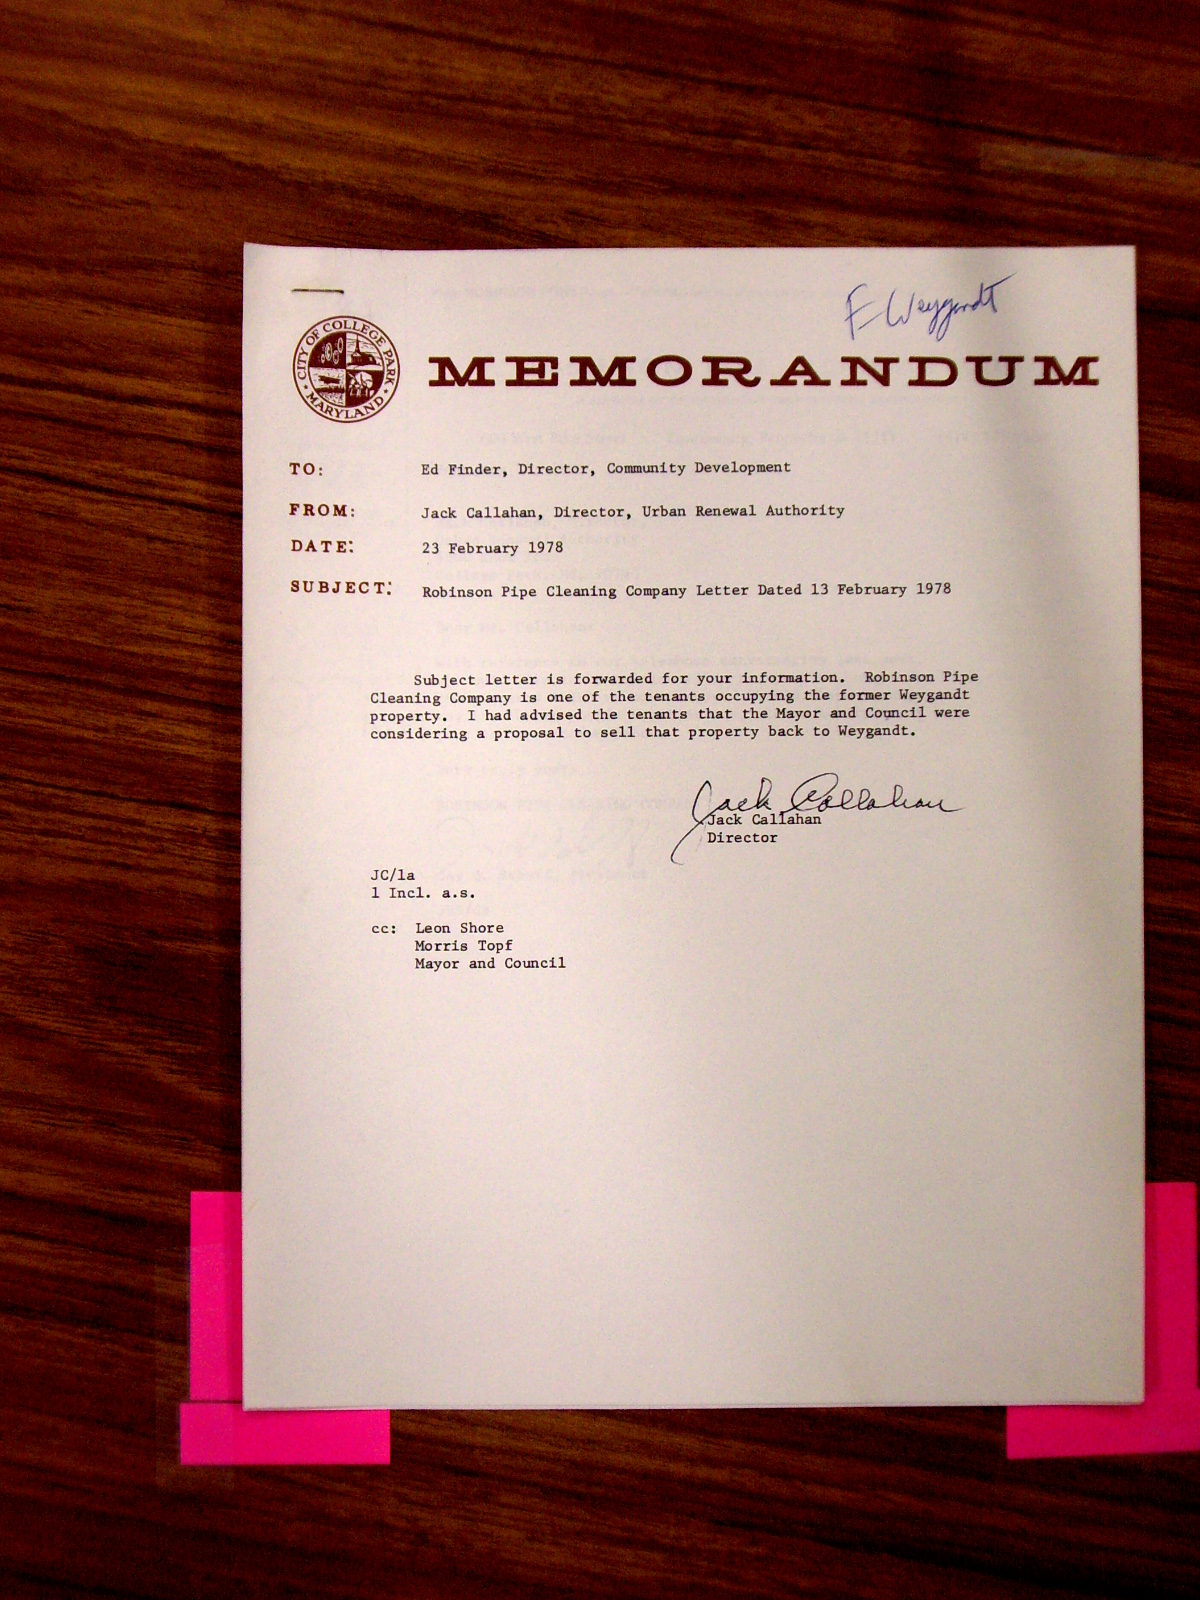 Memorandum from Jack Callahan to Ed Finder enclosing letter from Robinson Pipe Cleaning